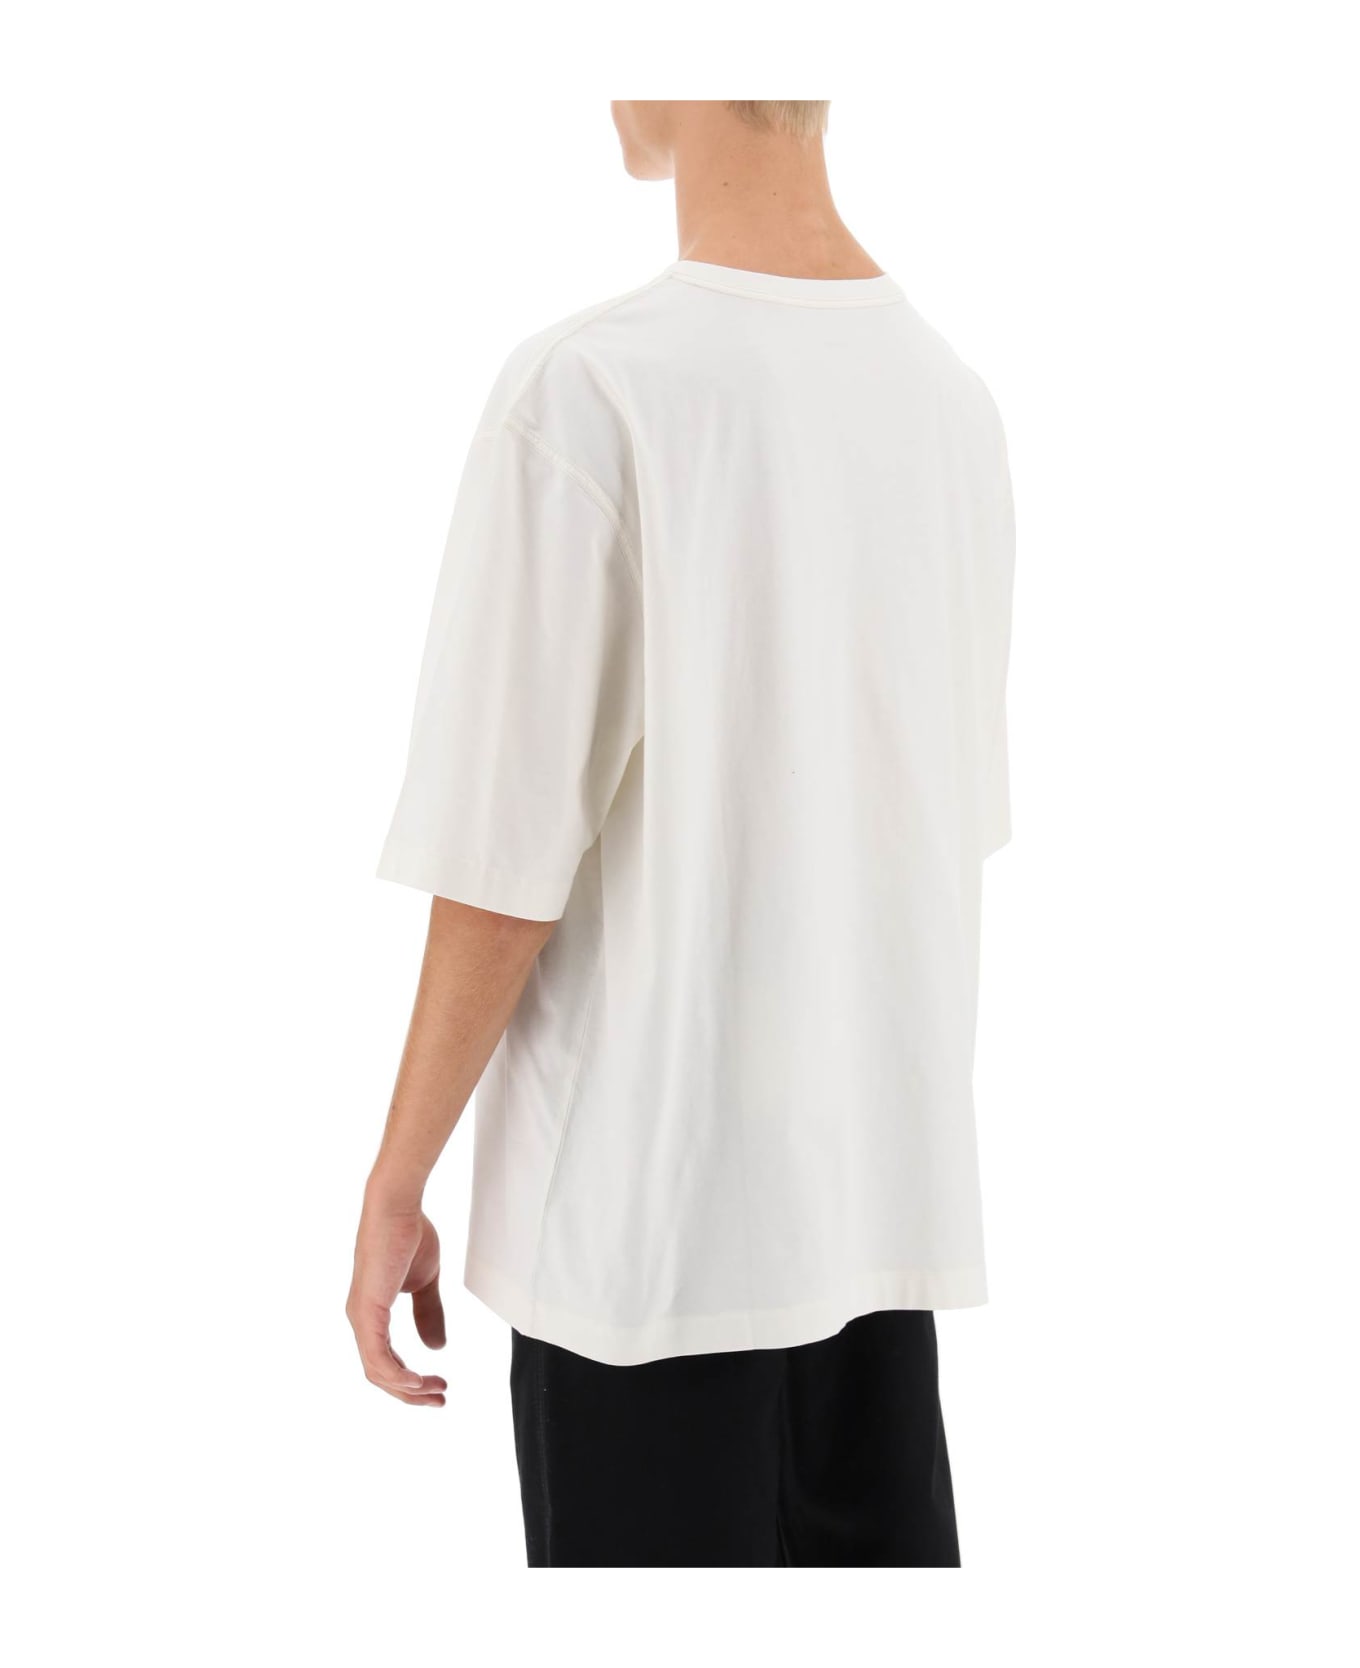 Lemaire Oversized T-shirt With Patch Pocket - LIGHT VANILLA (White)